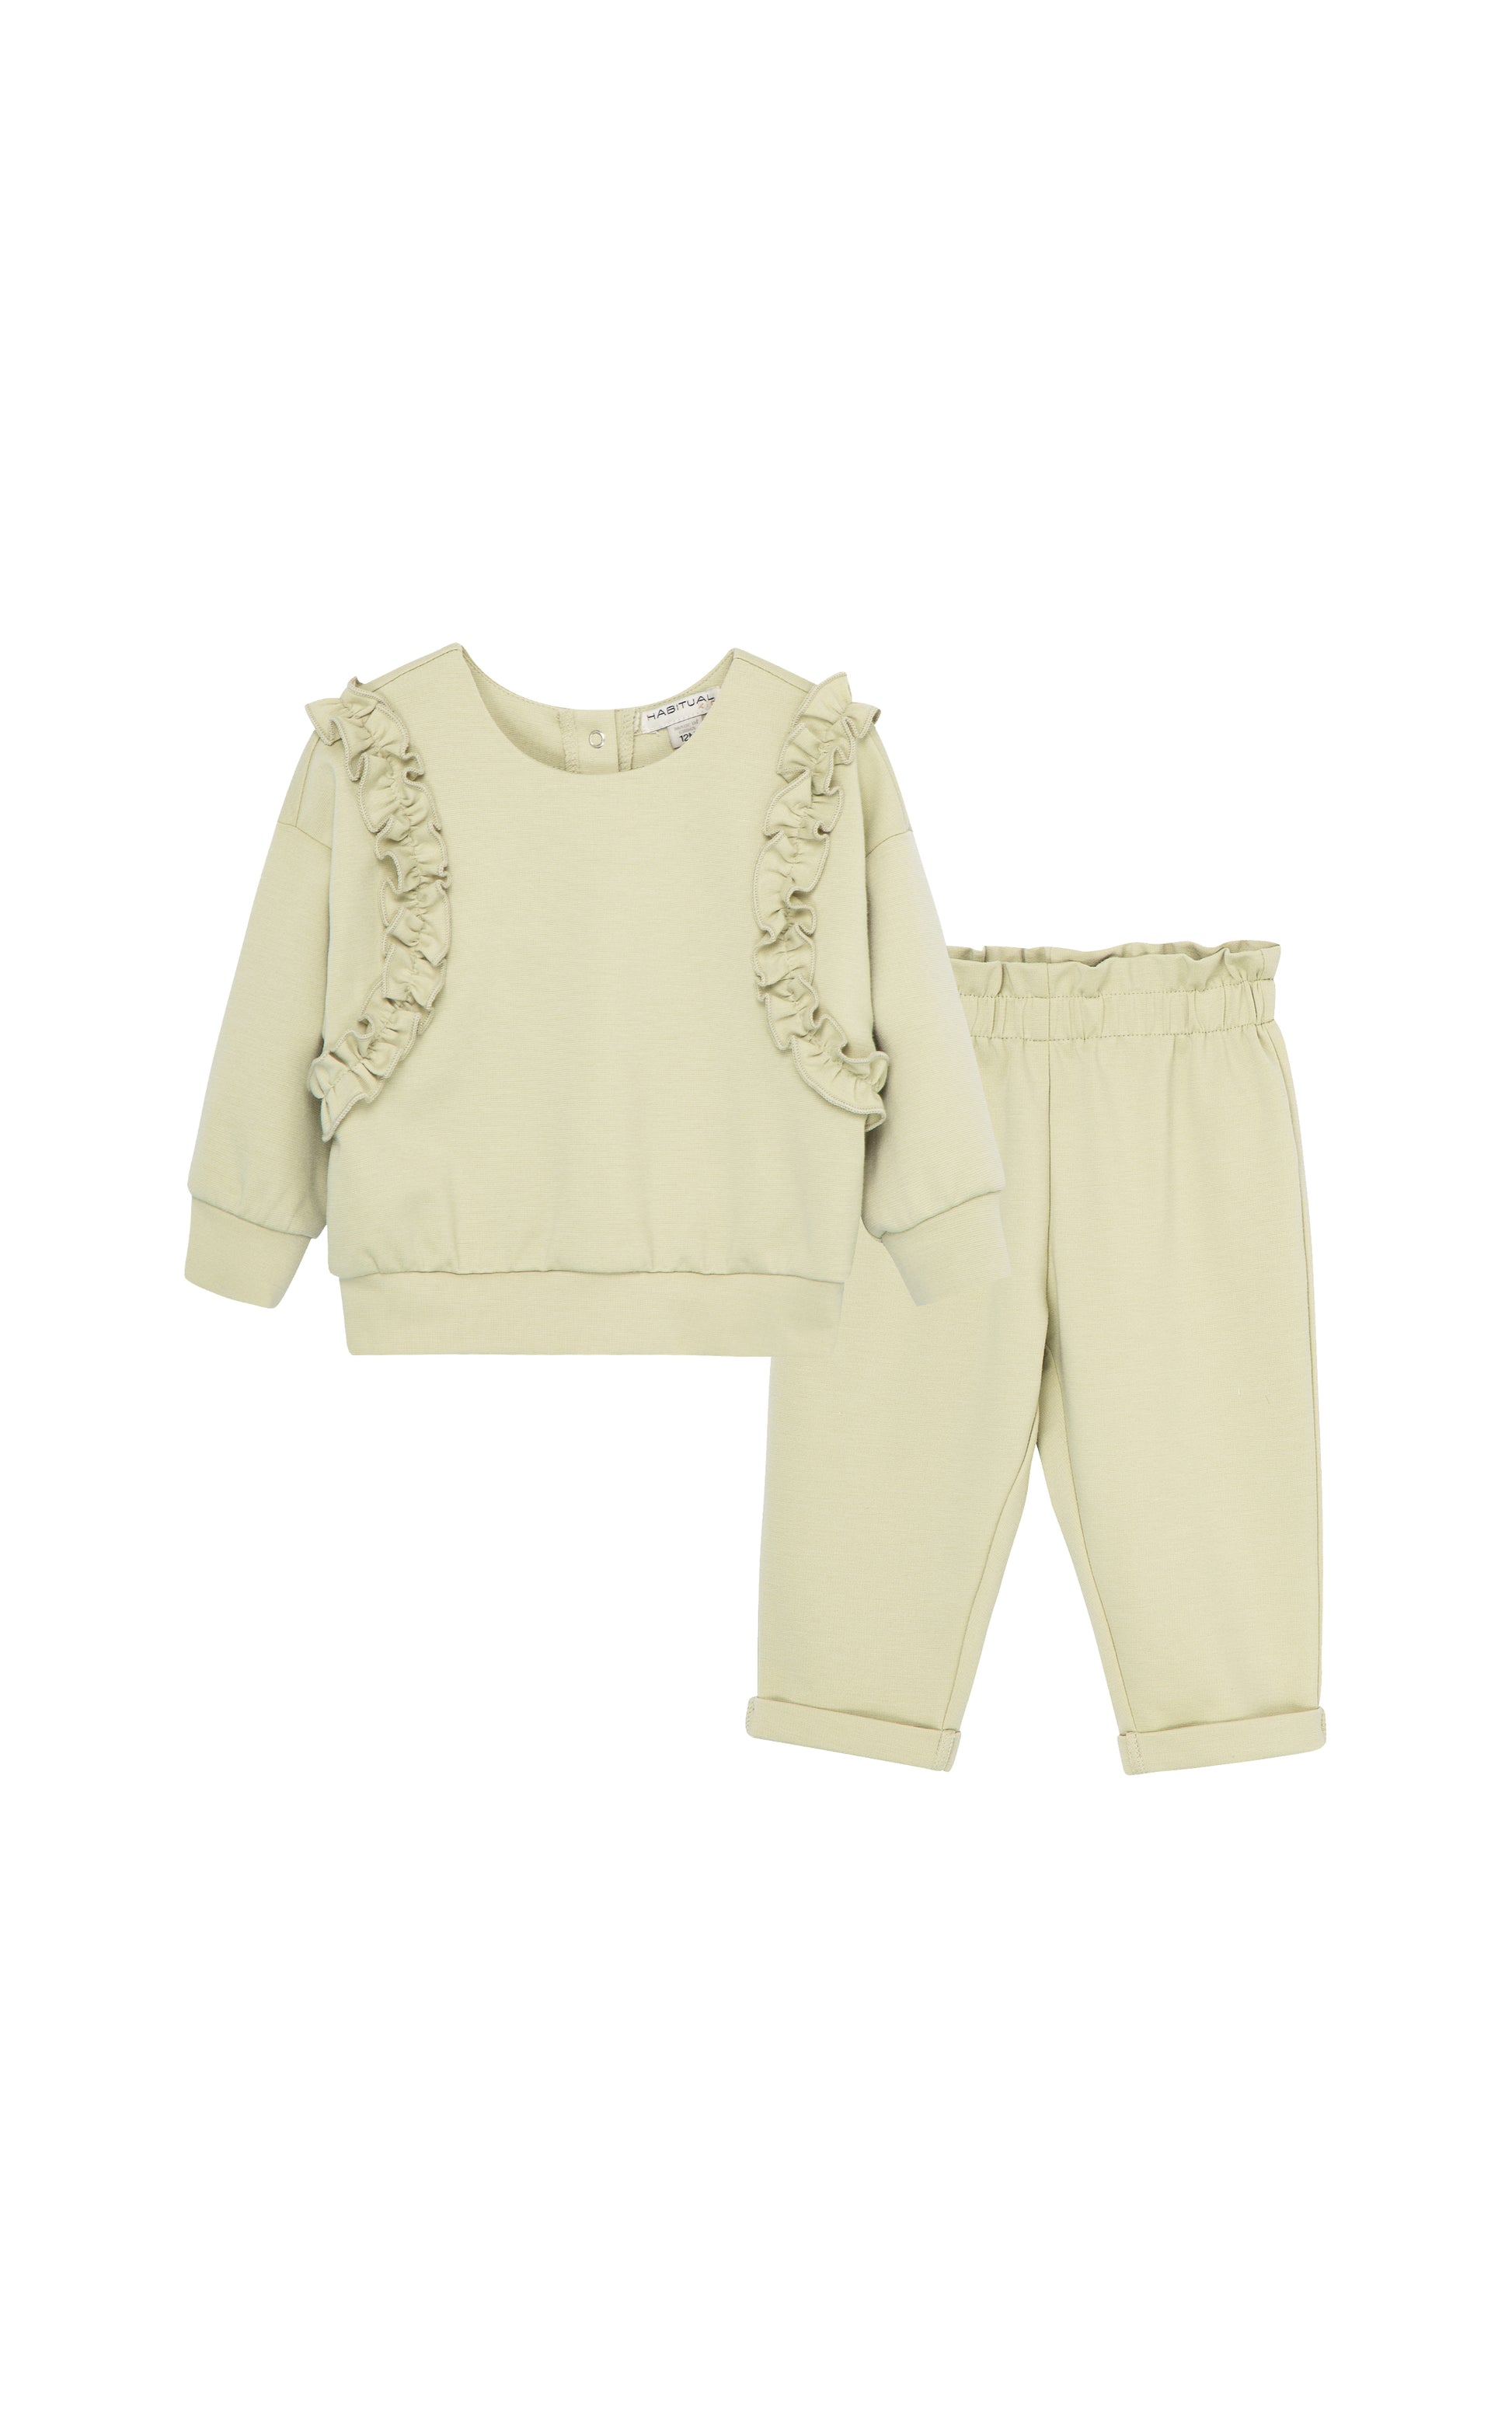 Olive ruched knit set with long sleeve ruffle top and matching pants with elastic band and cuffed ankles